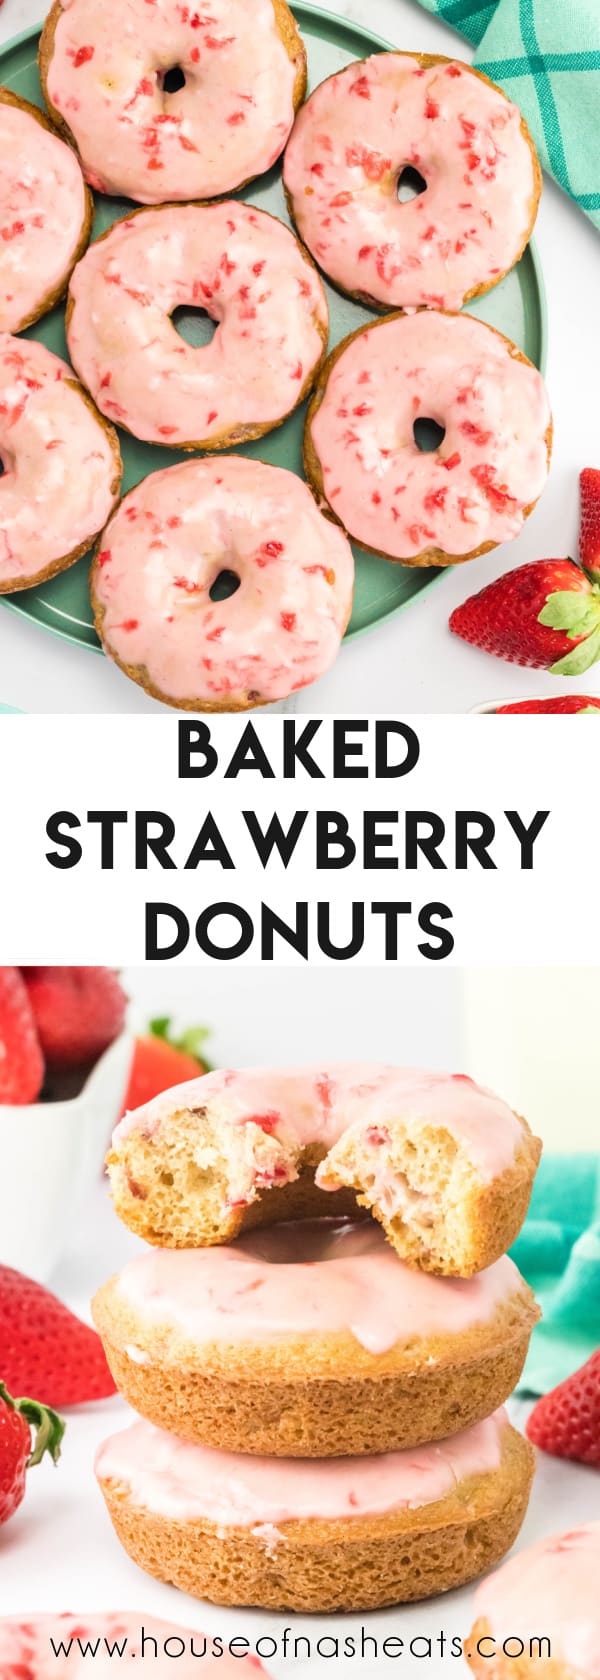 A collage of images of baked strawberry donuts with text overlay.